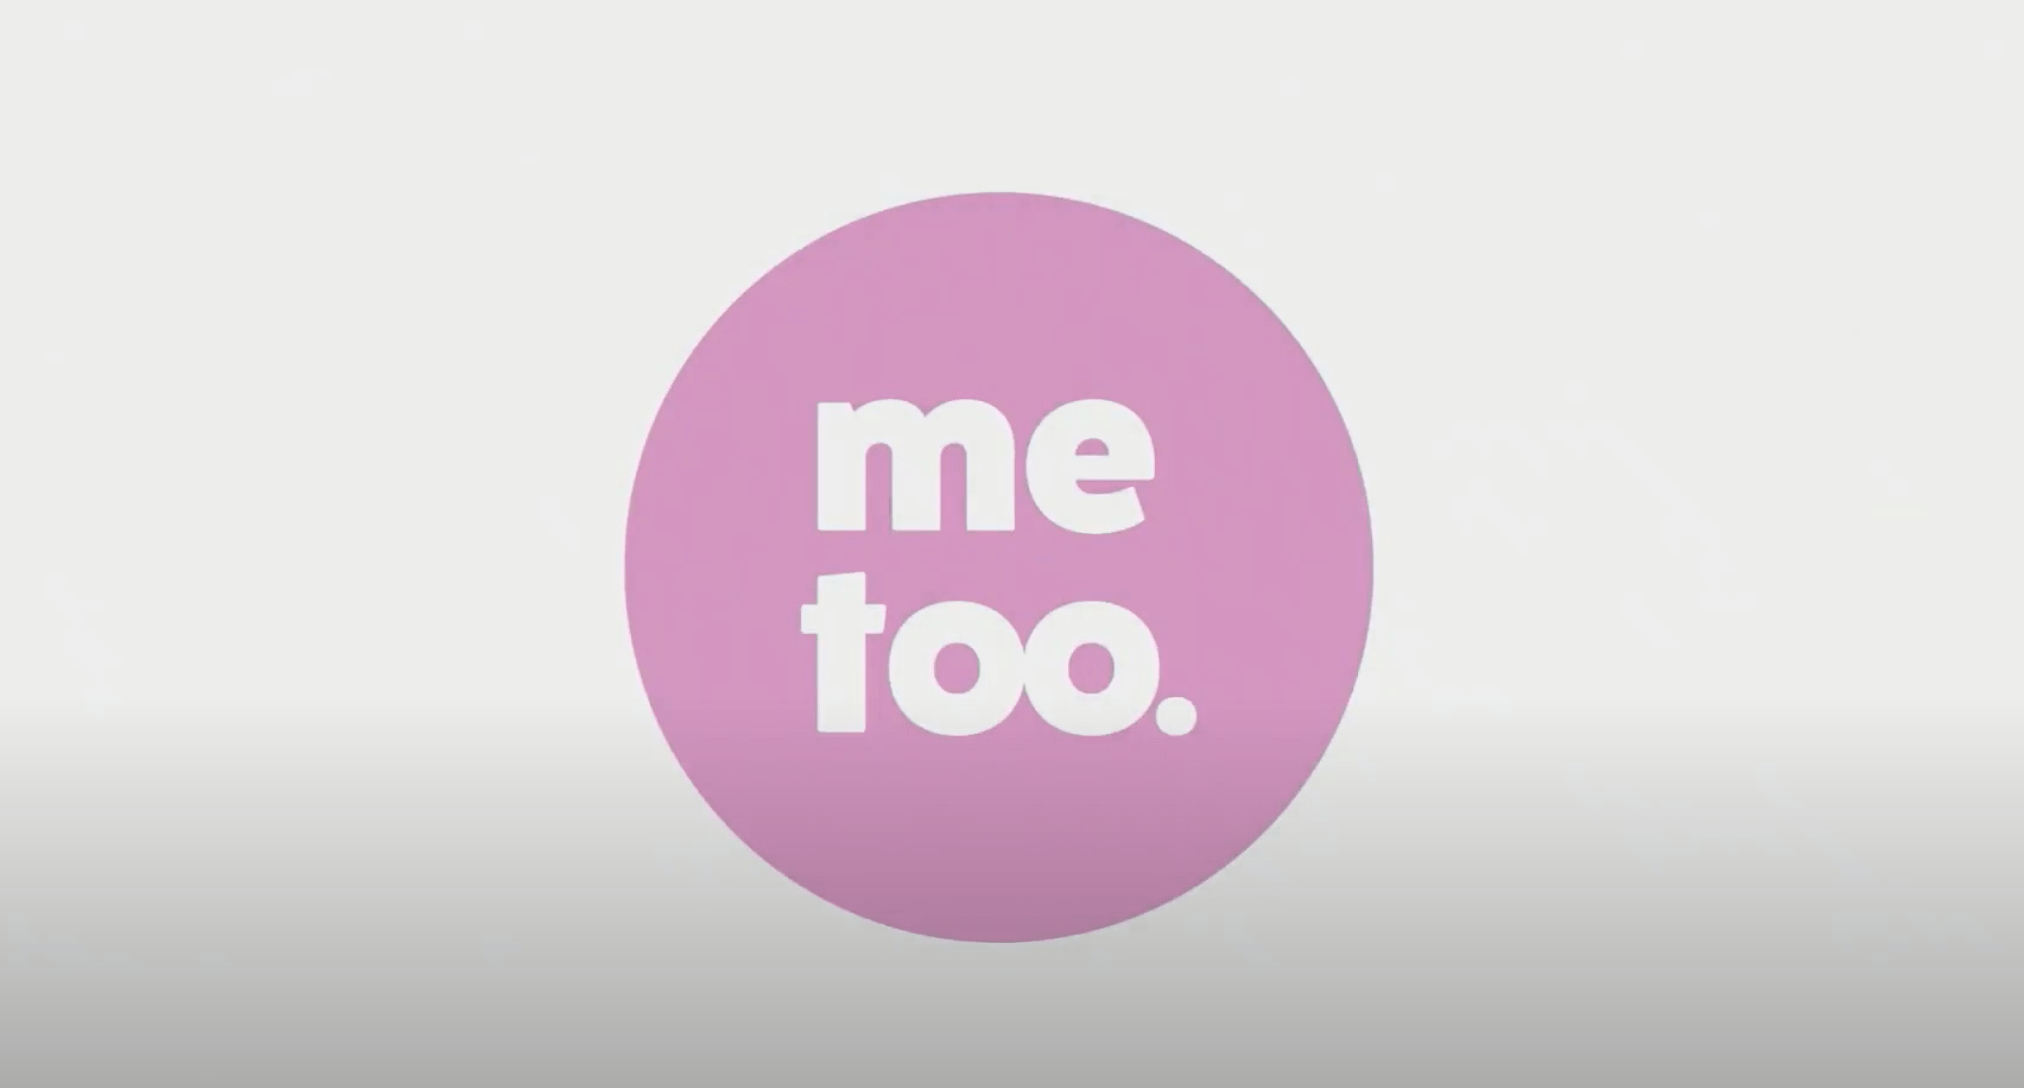 Pink Circle with white text inside that reads "me too."